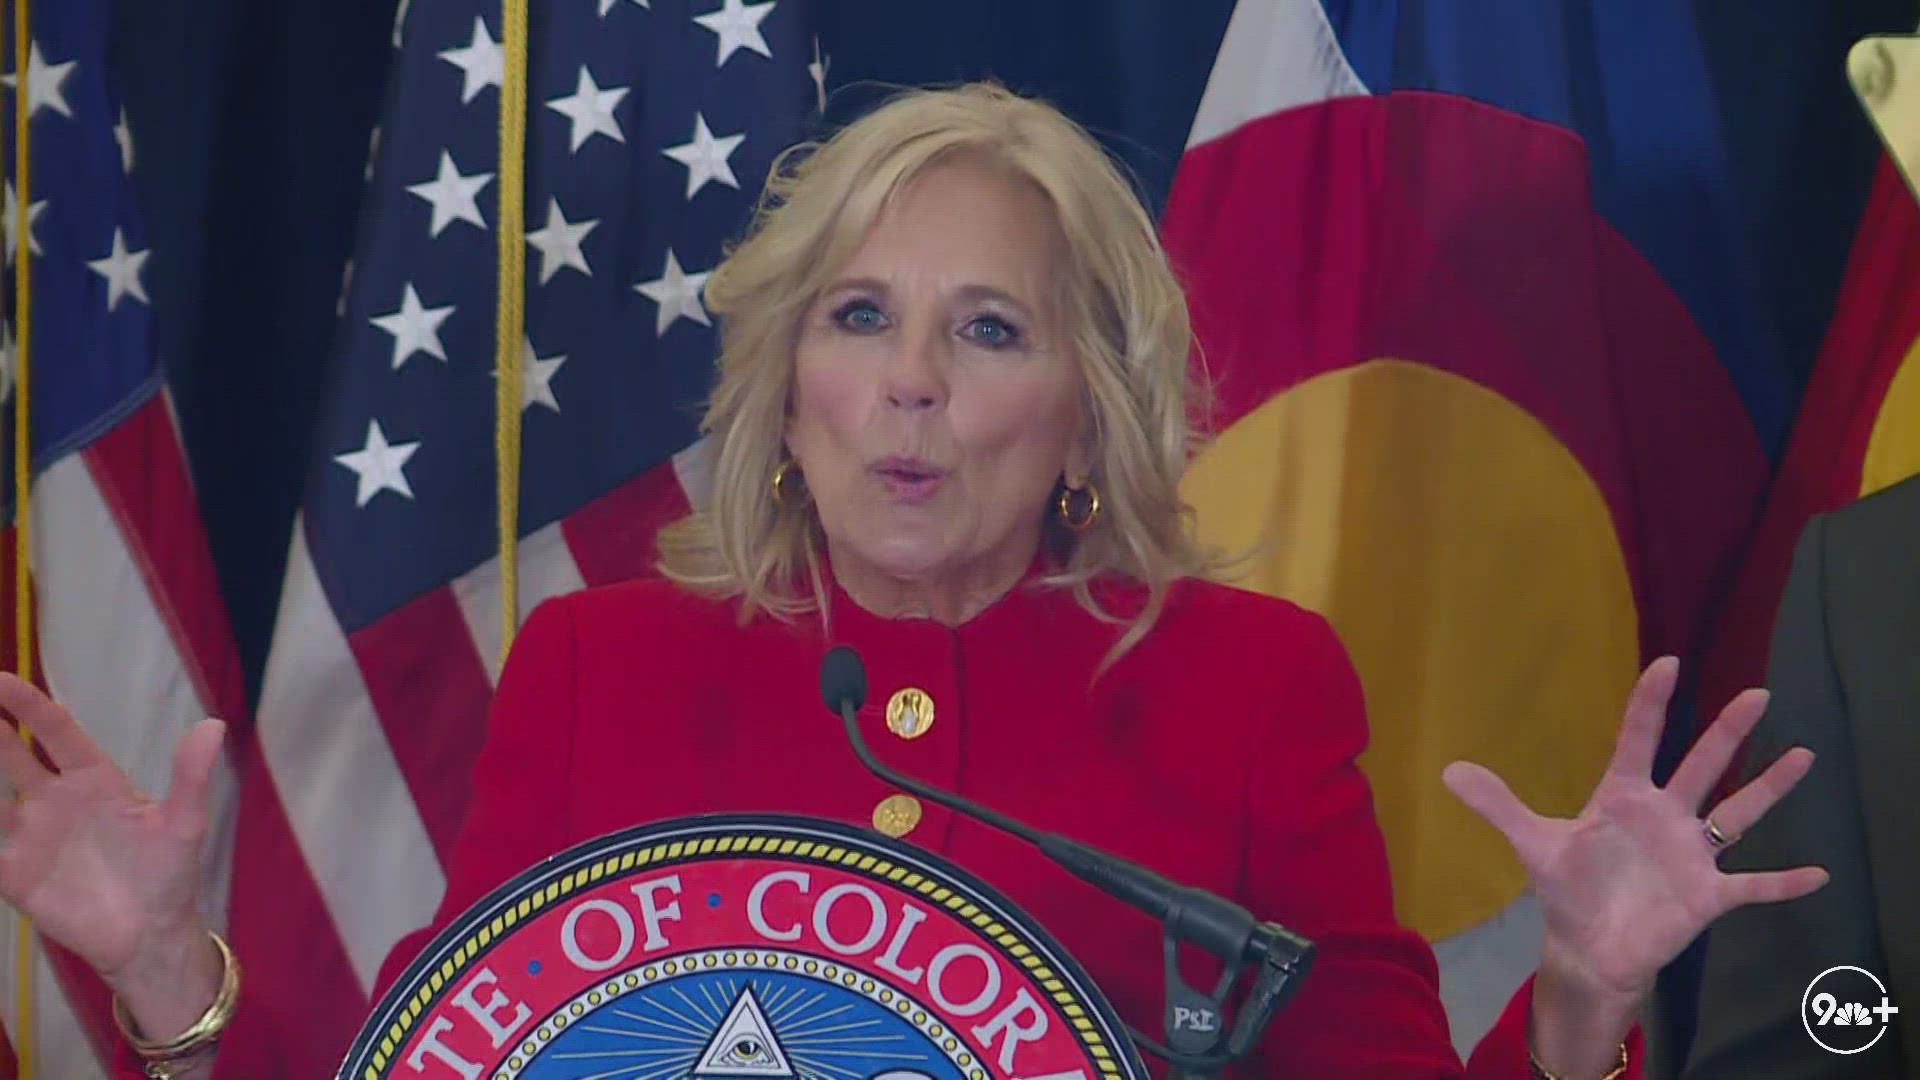 Dr. Jill Biden joined Gov. Jared Polis for an event at the Colorado State Capitol Monday, April 3.